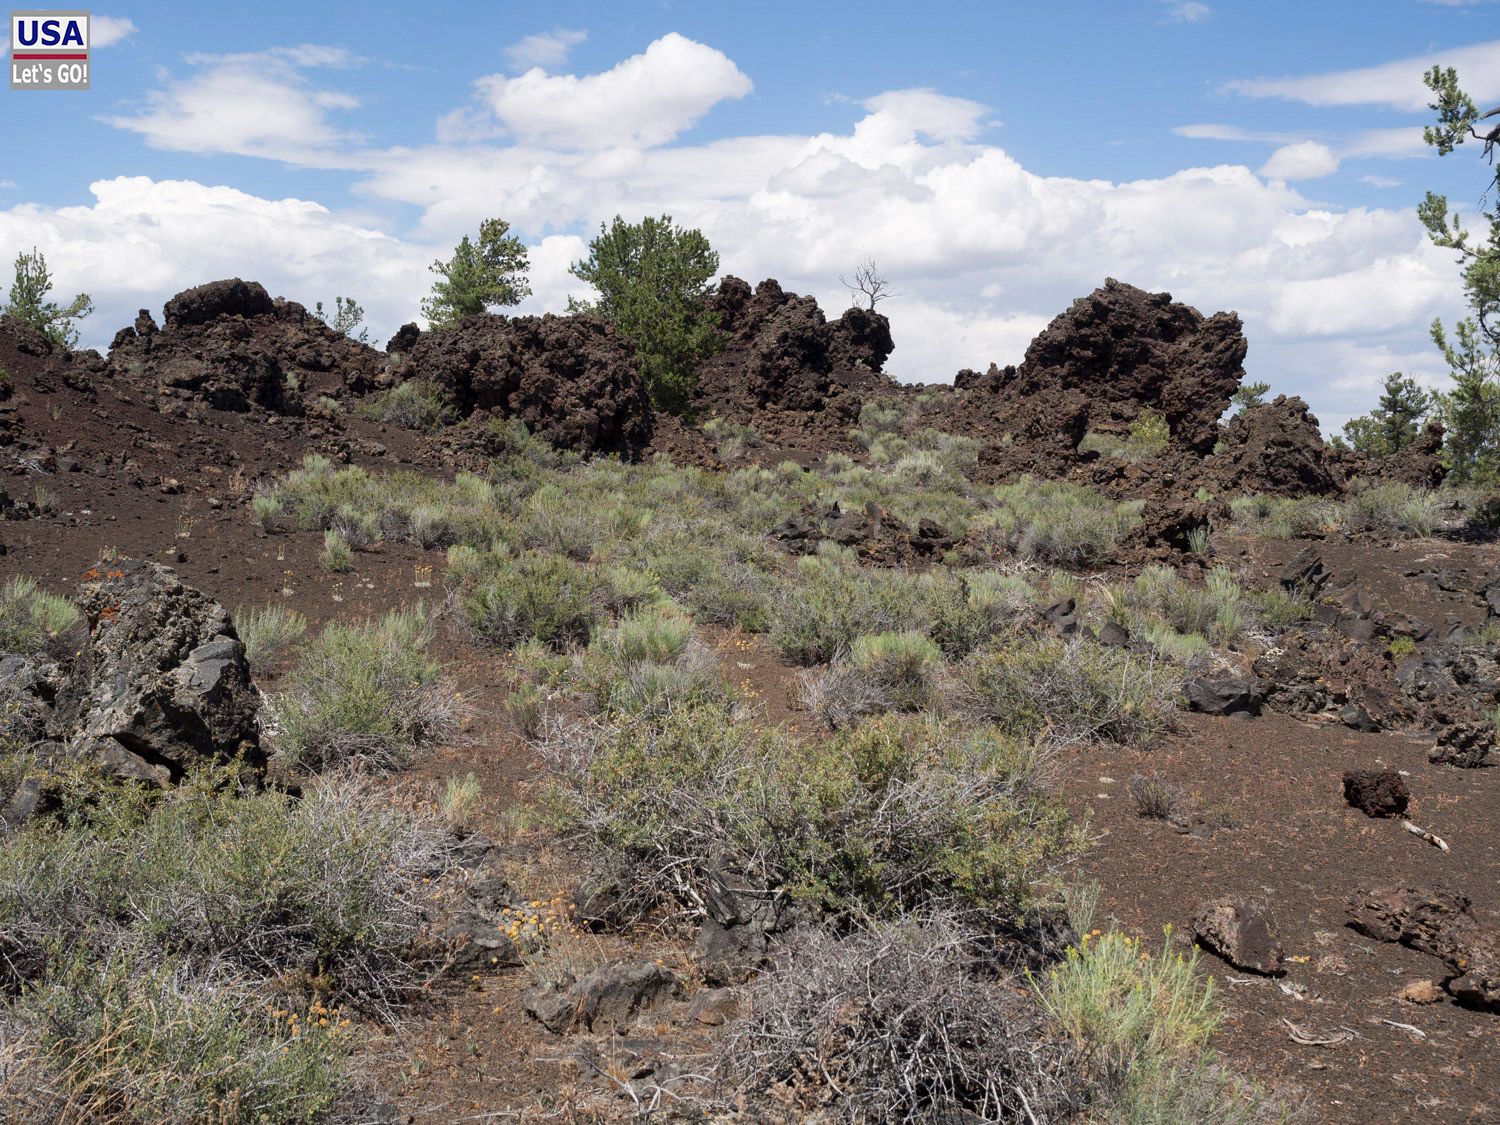 North Lava Flow Craters of the Moon